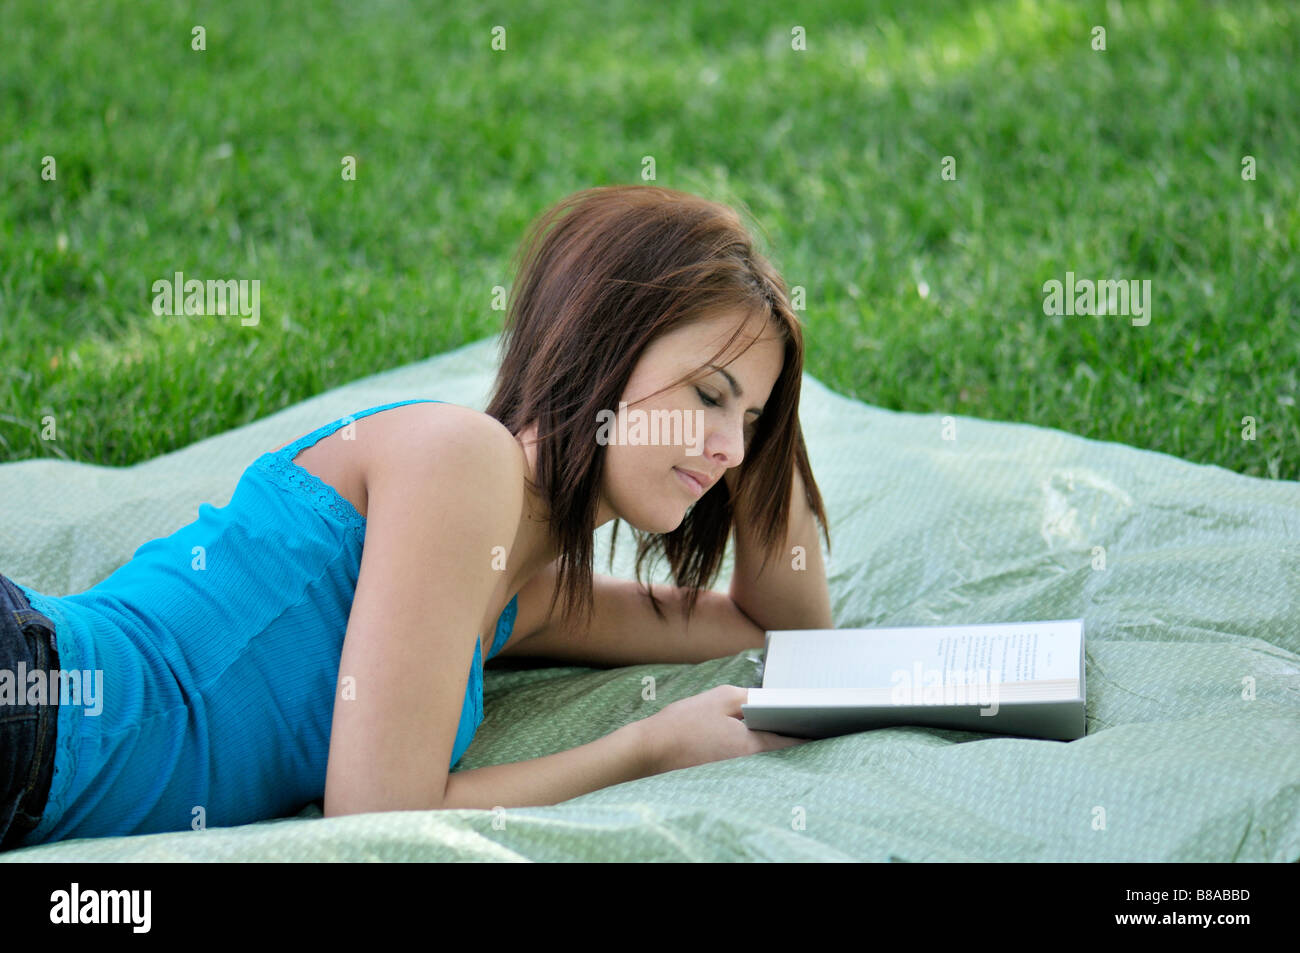 A pretty girl lies on a blanket outdoors and reads a book. USA. Stock Photo